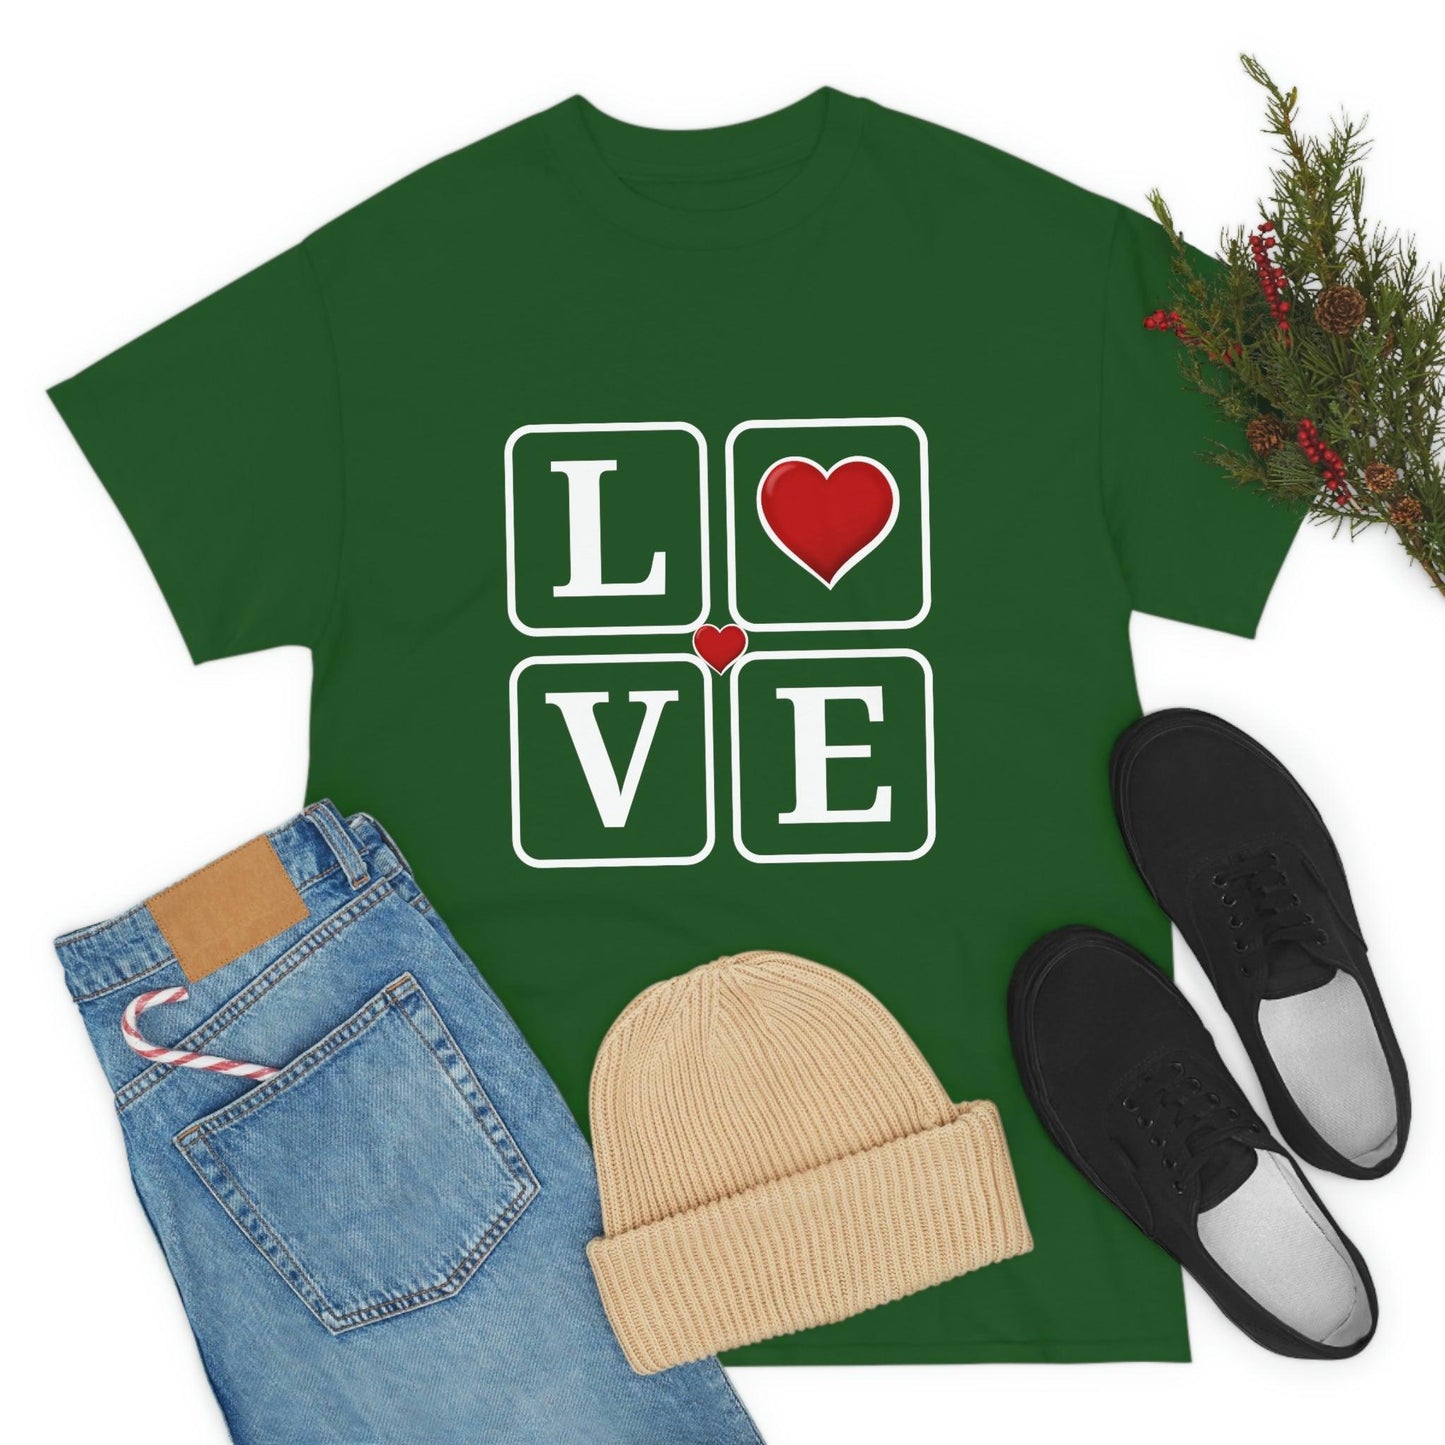 Love square Hearts Shirt, Great Gift for Valentine's day, birthday, engagement, anniversary and many more